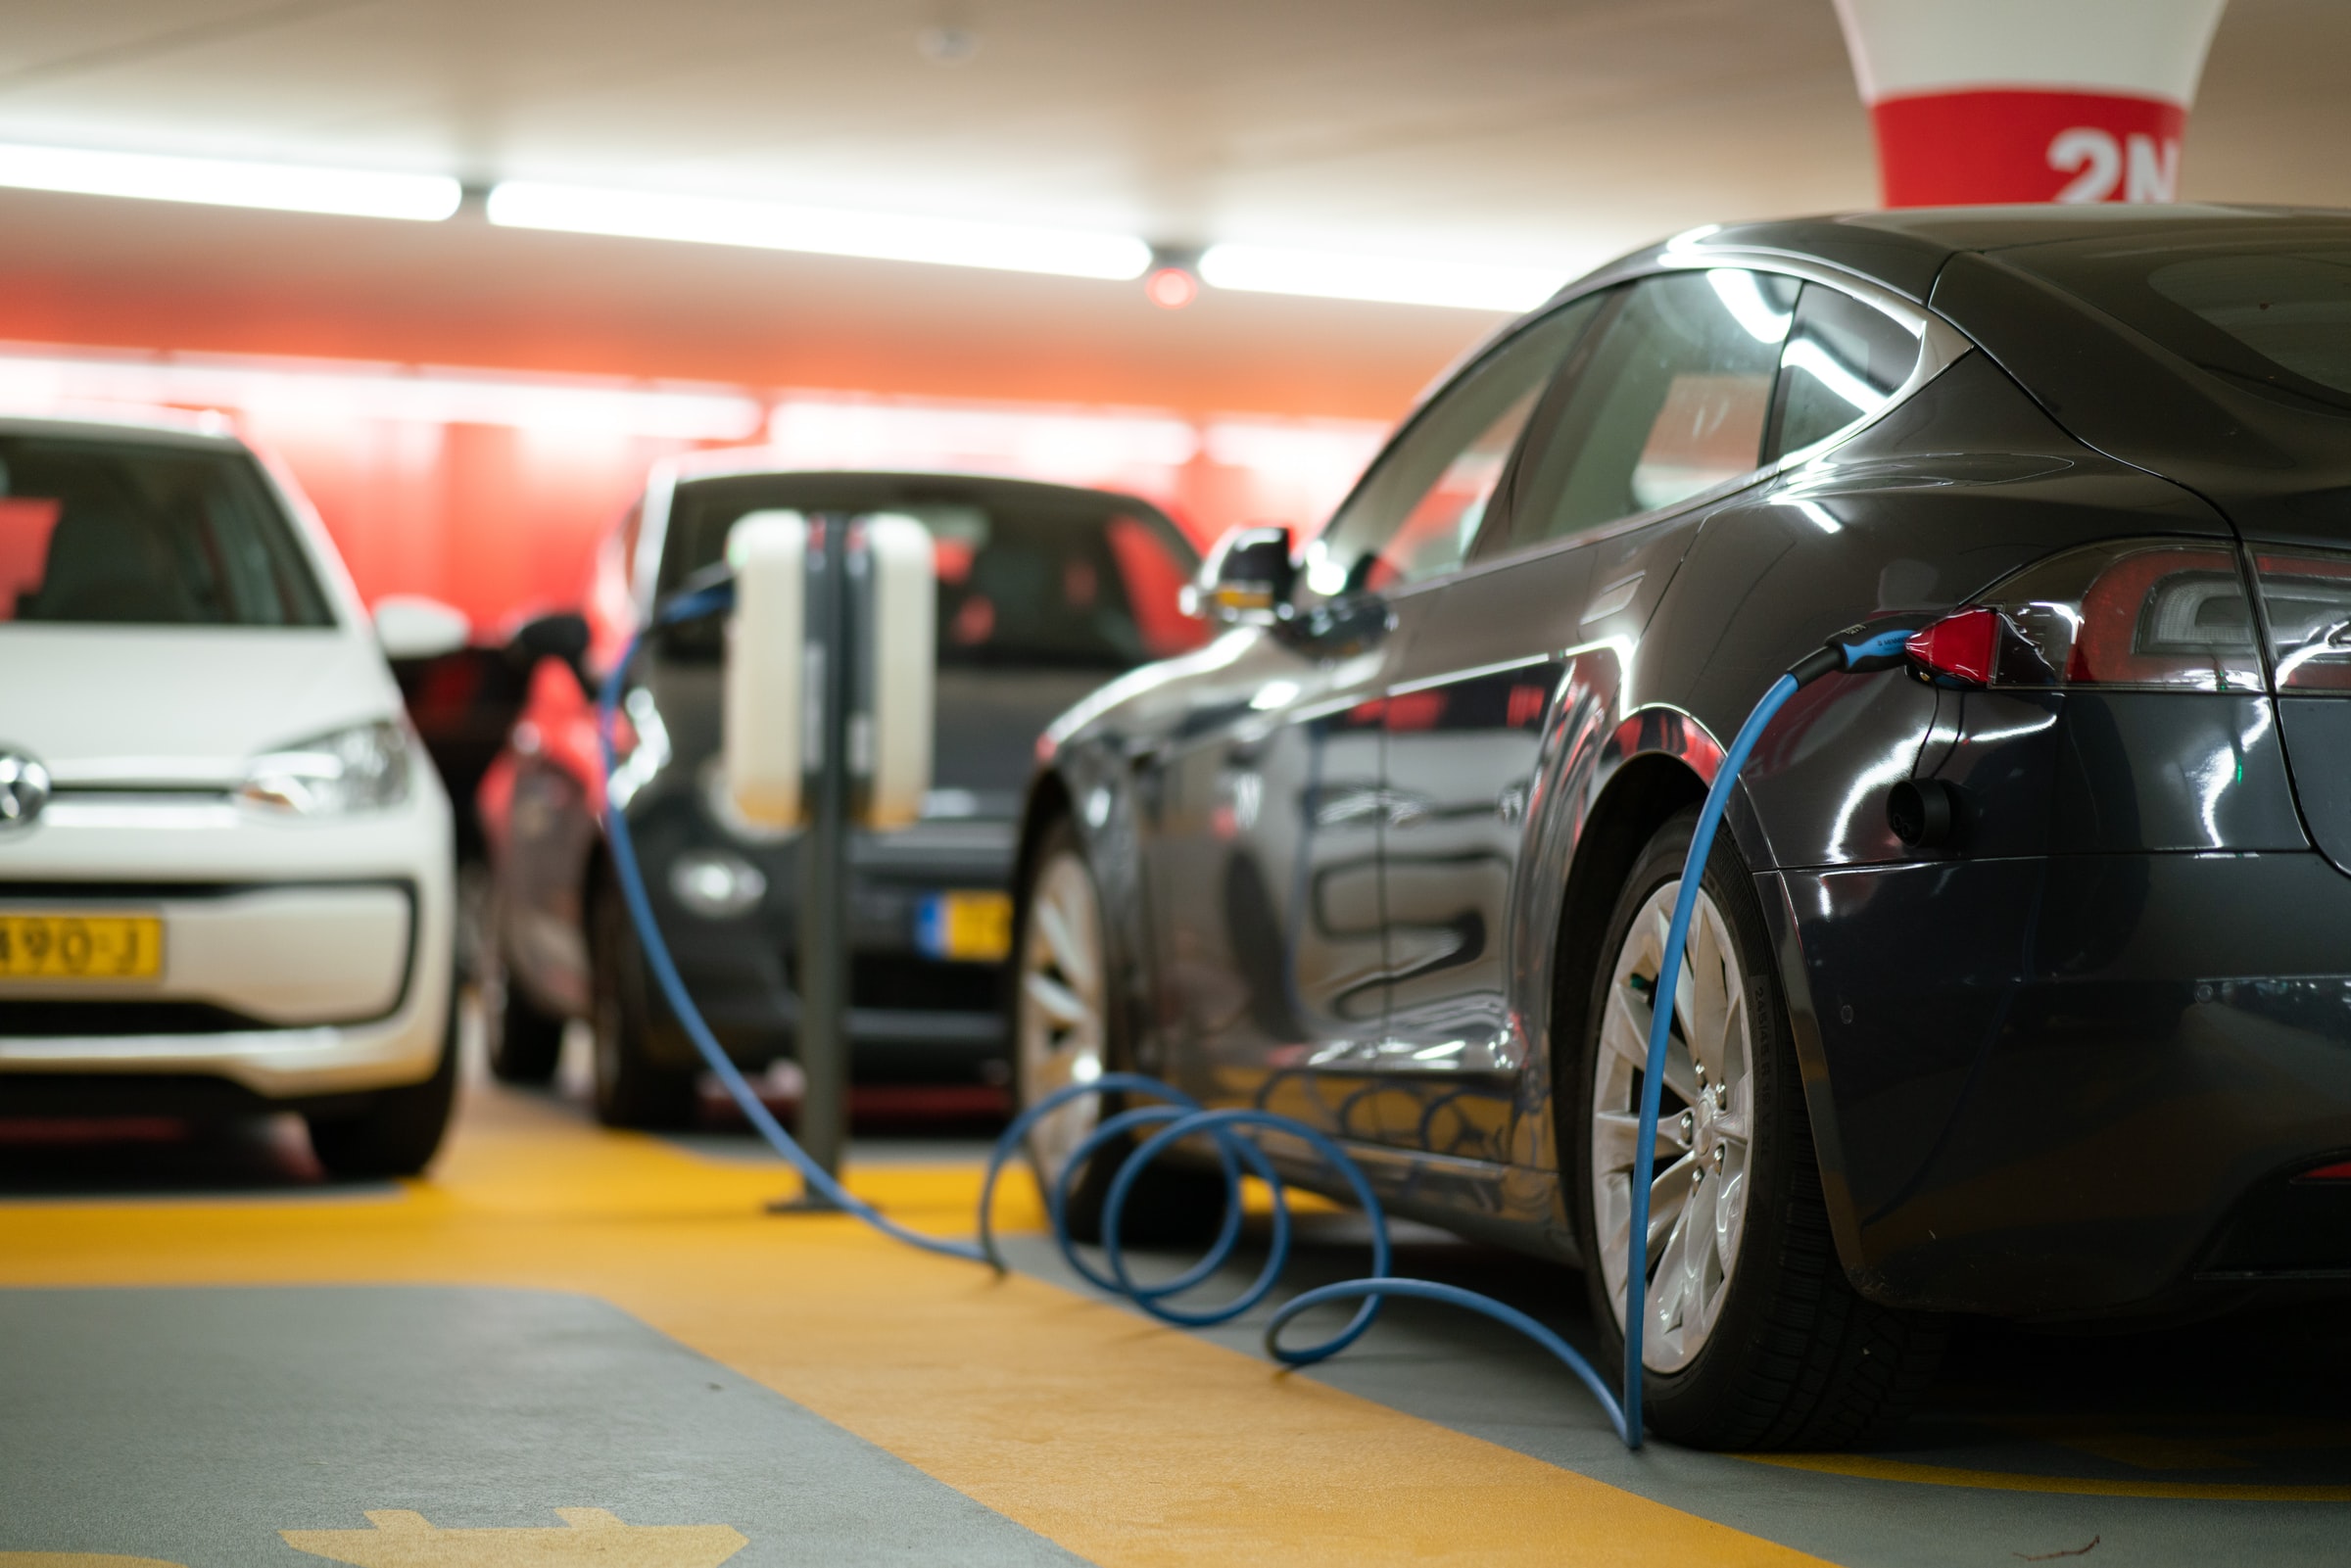 Ensuring Safe EV Charging at Home: Common Safety Concerns and Best Practices